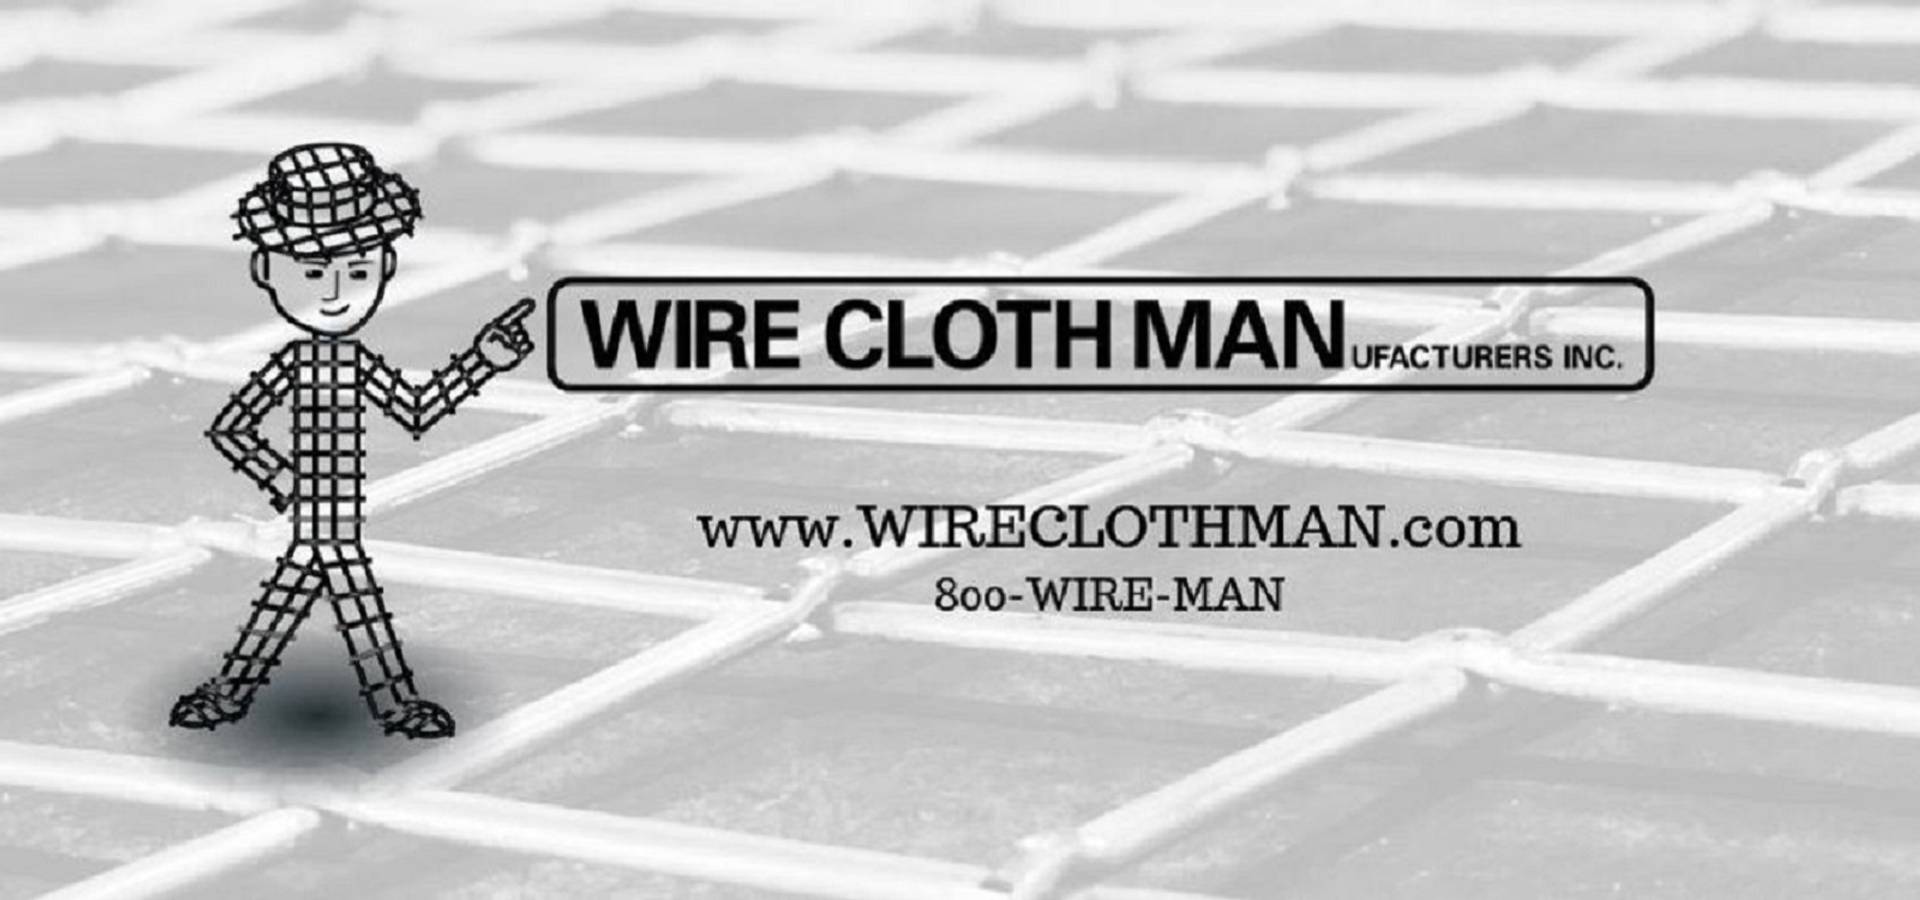 Wire Cloth Manufacturers, Inc.